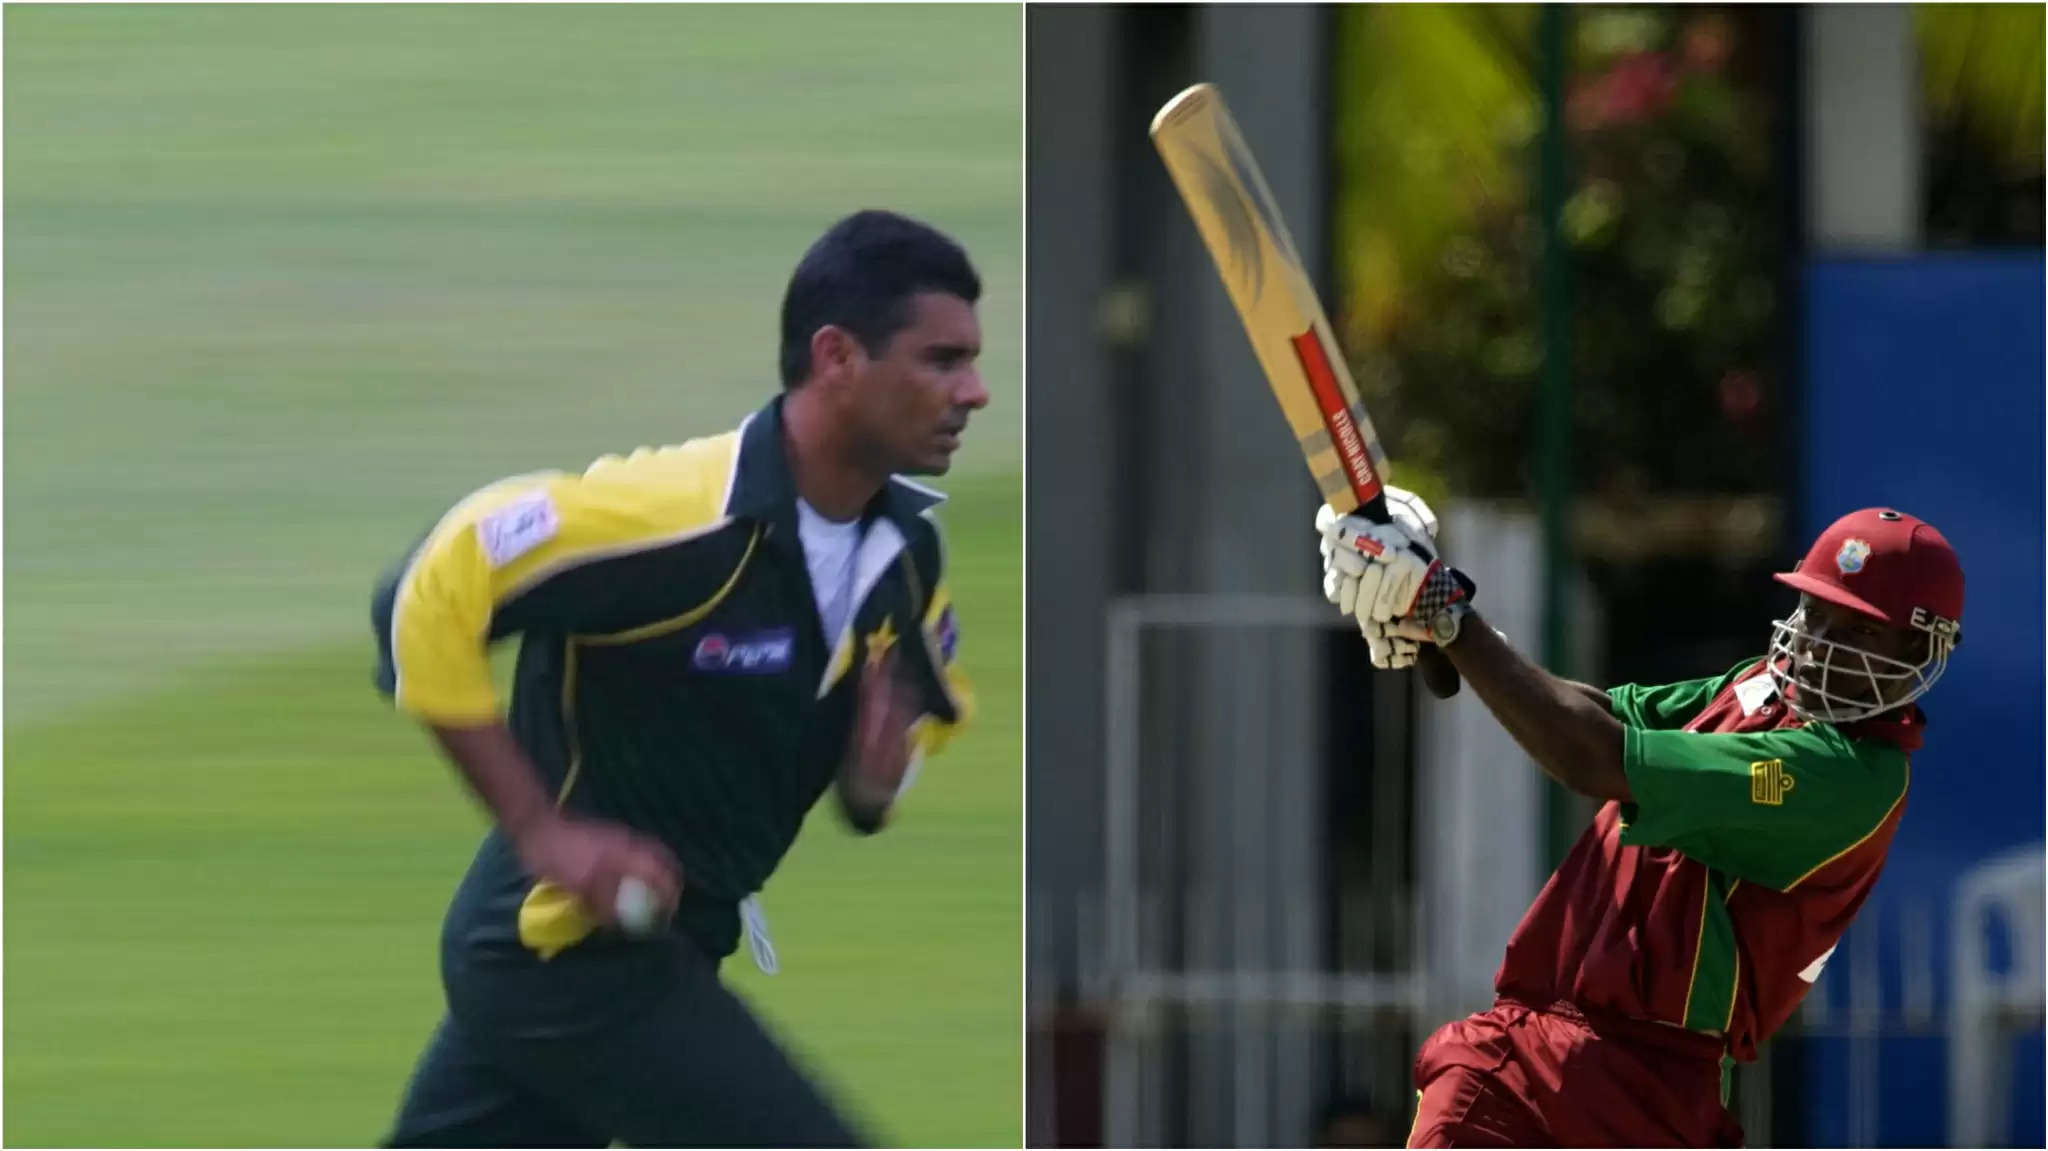 WATCH: Young Chris Gayle smashes Waqar Younis’s bouncer out of the stadium